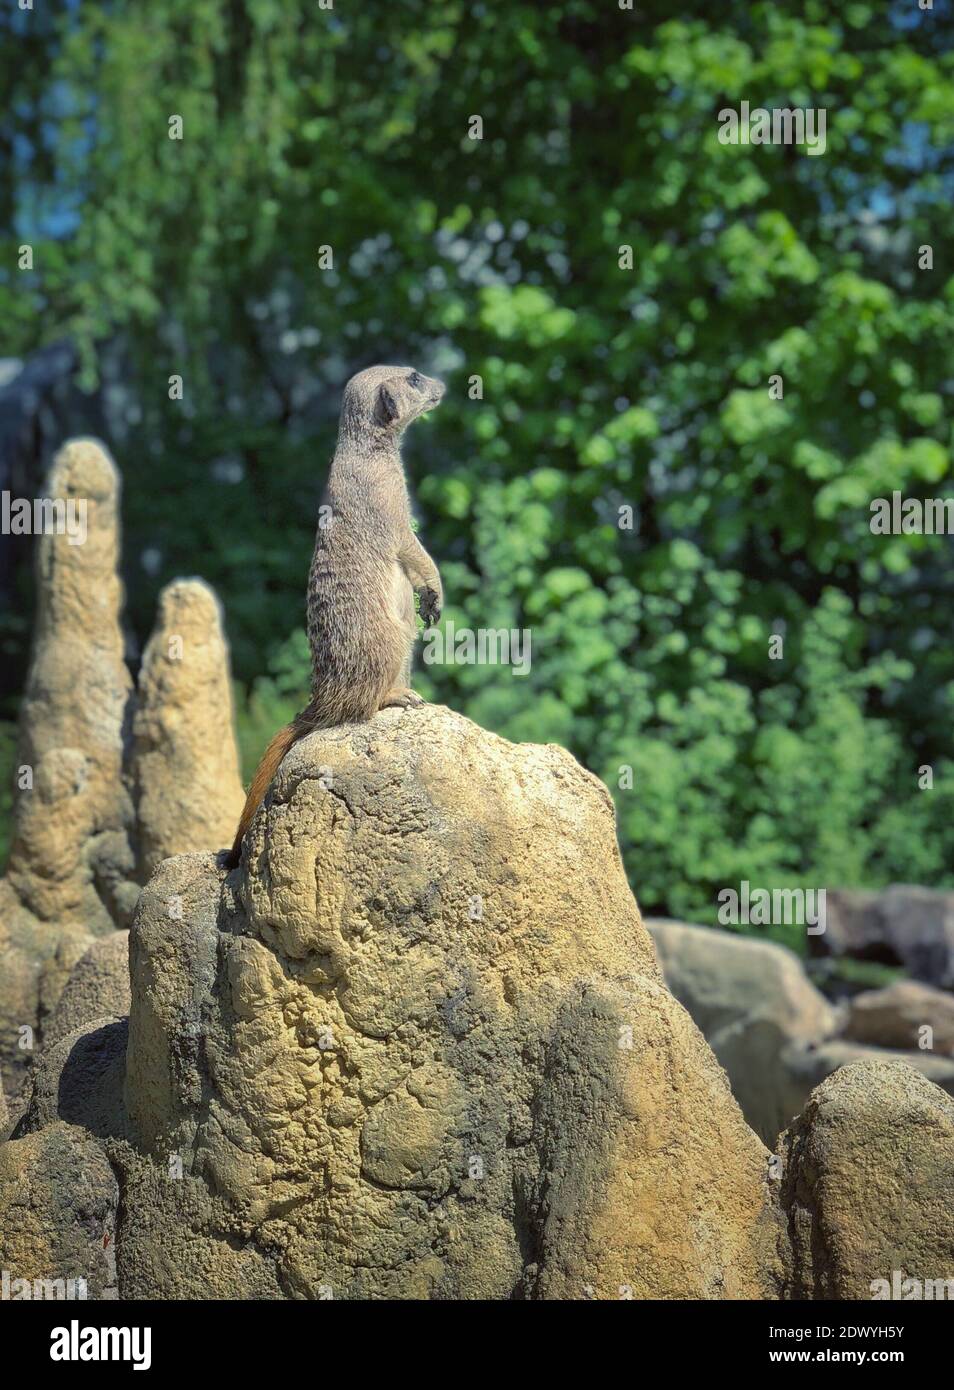 View Of An Animal Sitting On Rock Stock Photo